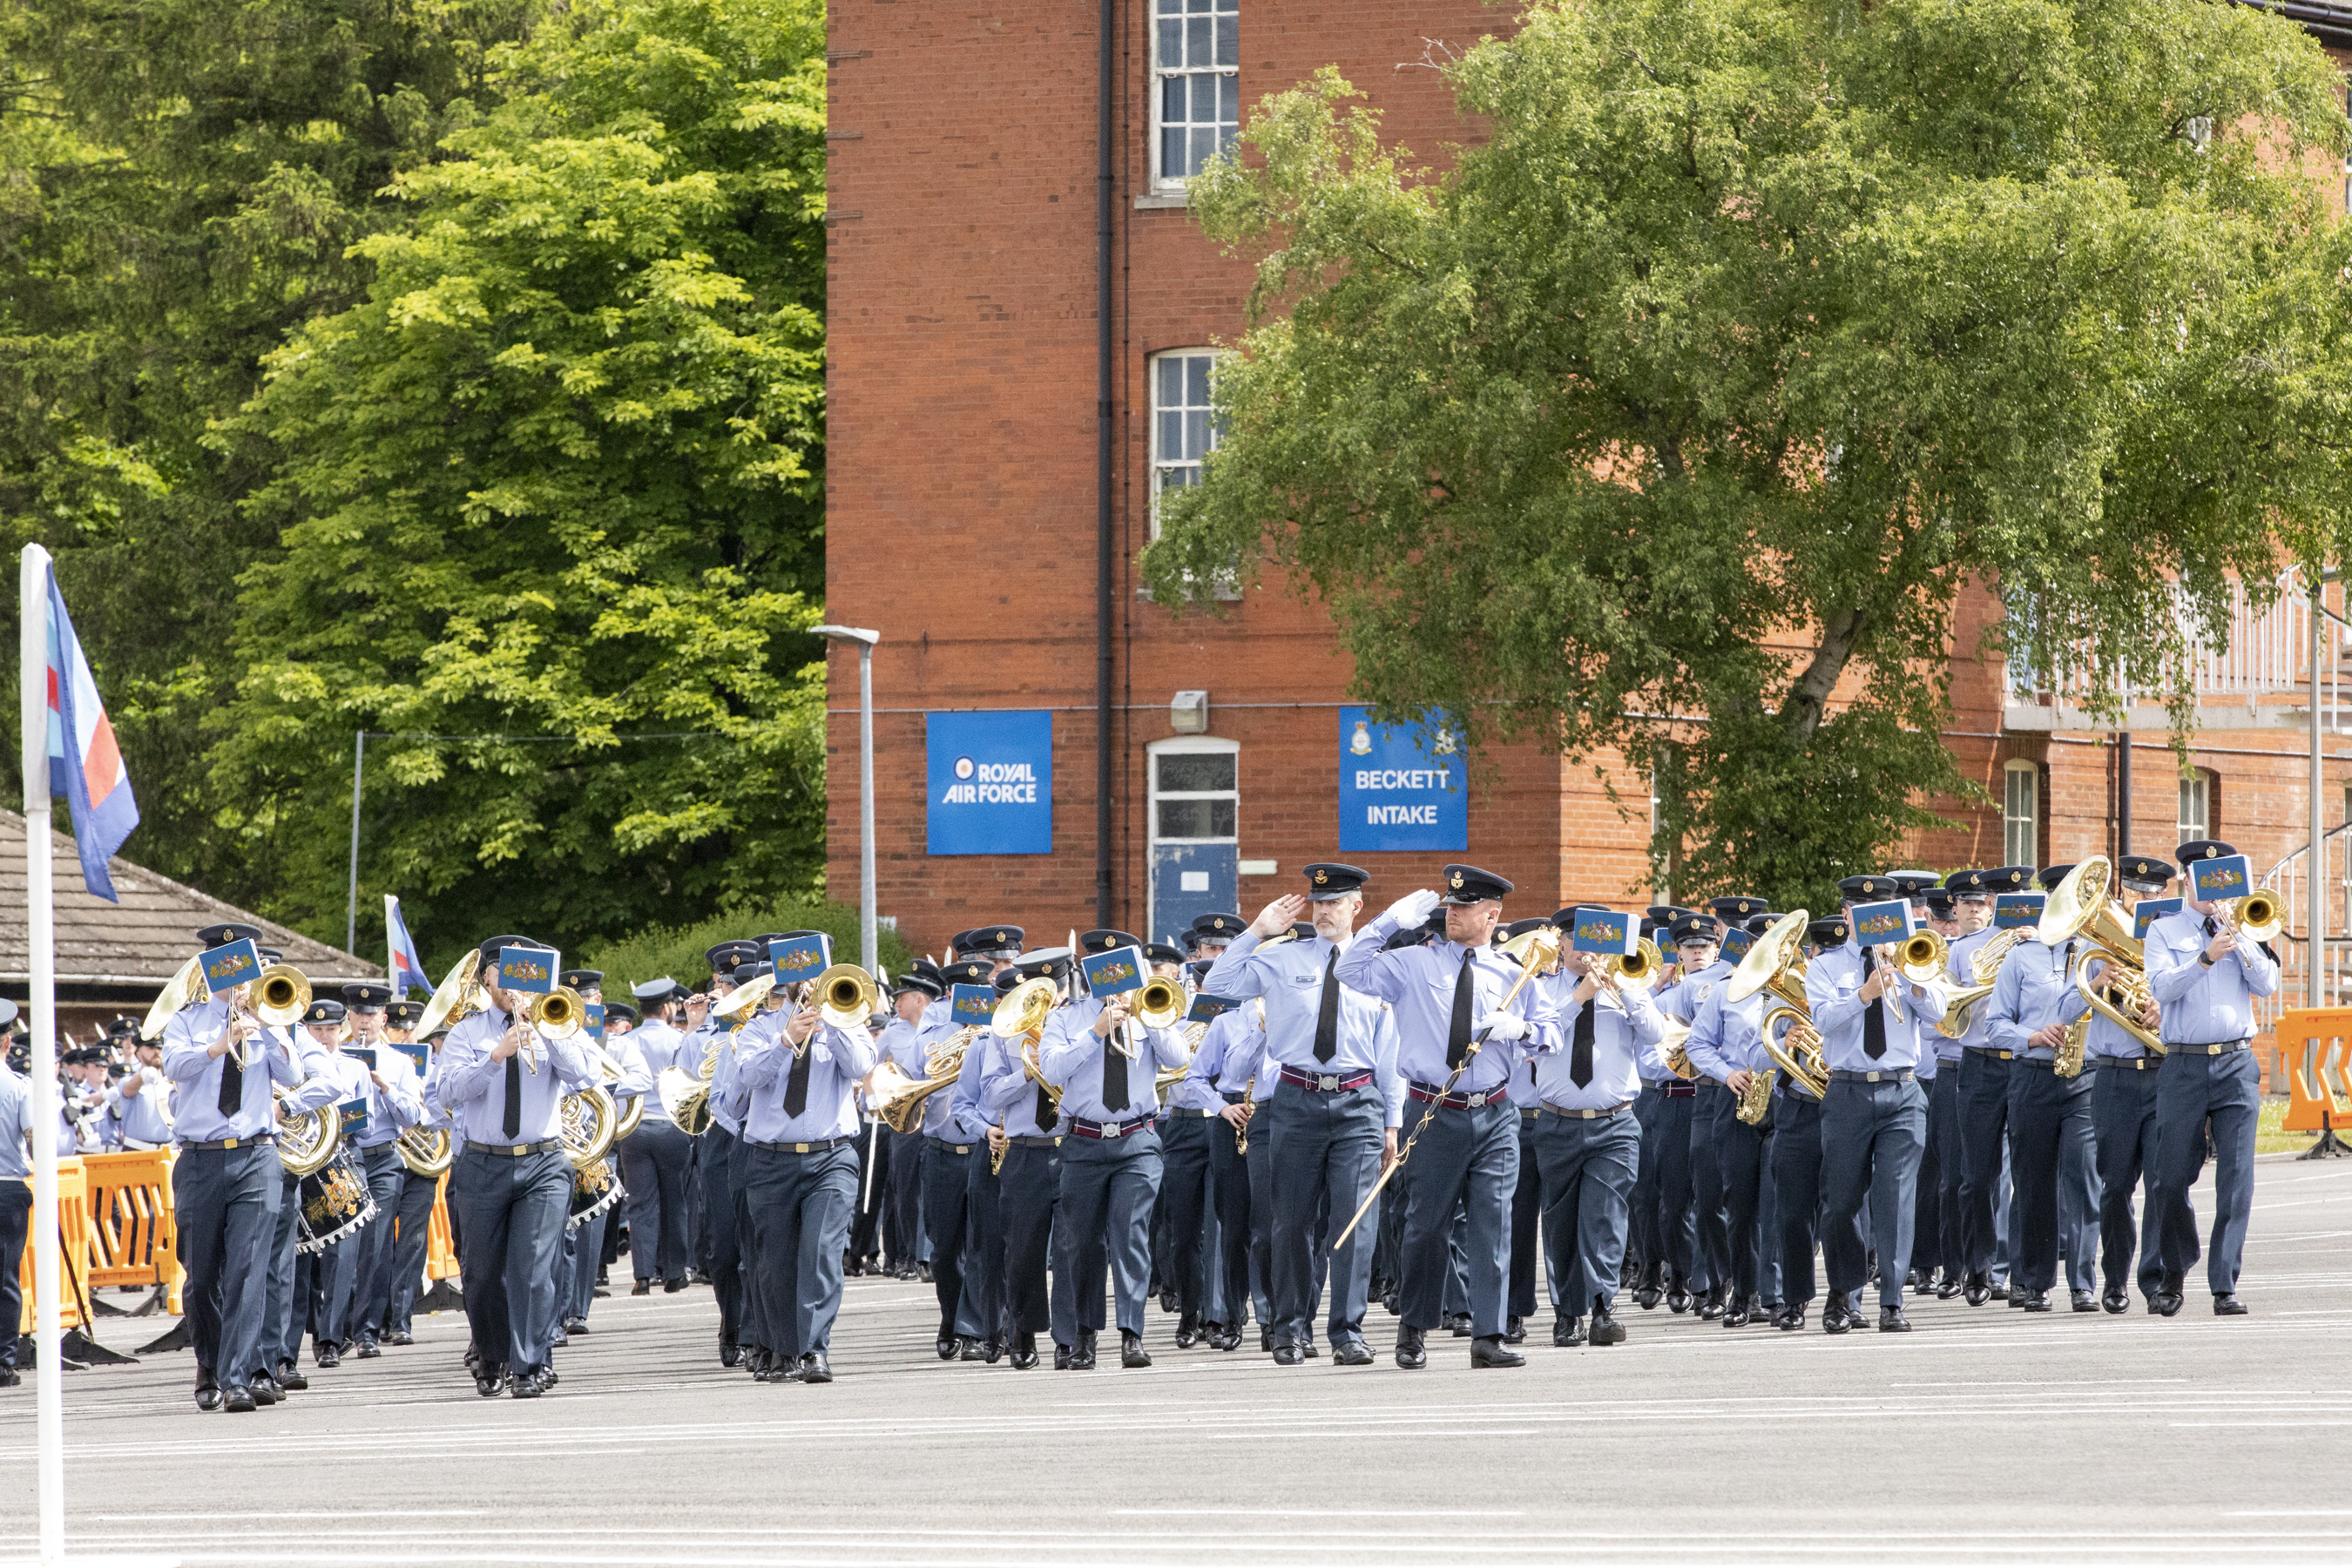 RAF Musicians practise on parade, with instruments.